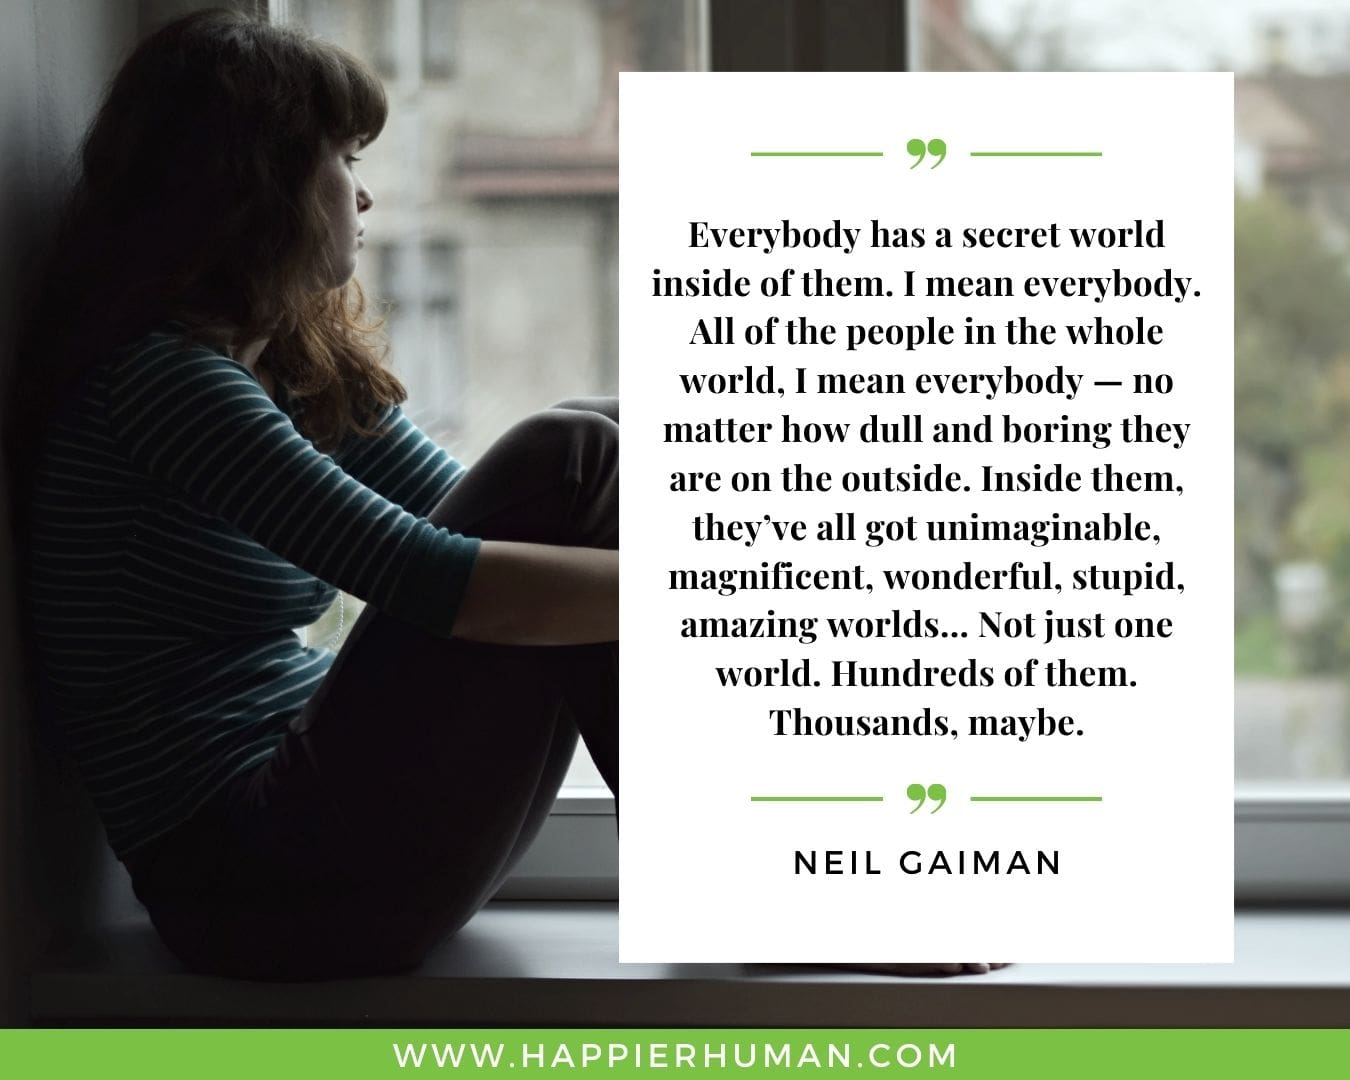 Introvert Quotes - “Everybody has a secret world inside of them. I mean everybody. All of the people in the whole world, I mean everybody — no matter how dull and boring they are on the outside. Inside them, they’ve all got unimaginable, magnificent, wonderful, stupid, amazing worlds… Not just one world. Hundreds of them. Thousands, maybe.” – Neil Gaiman